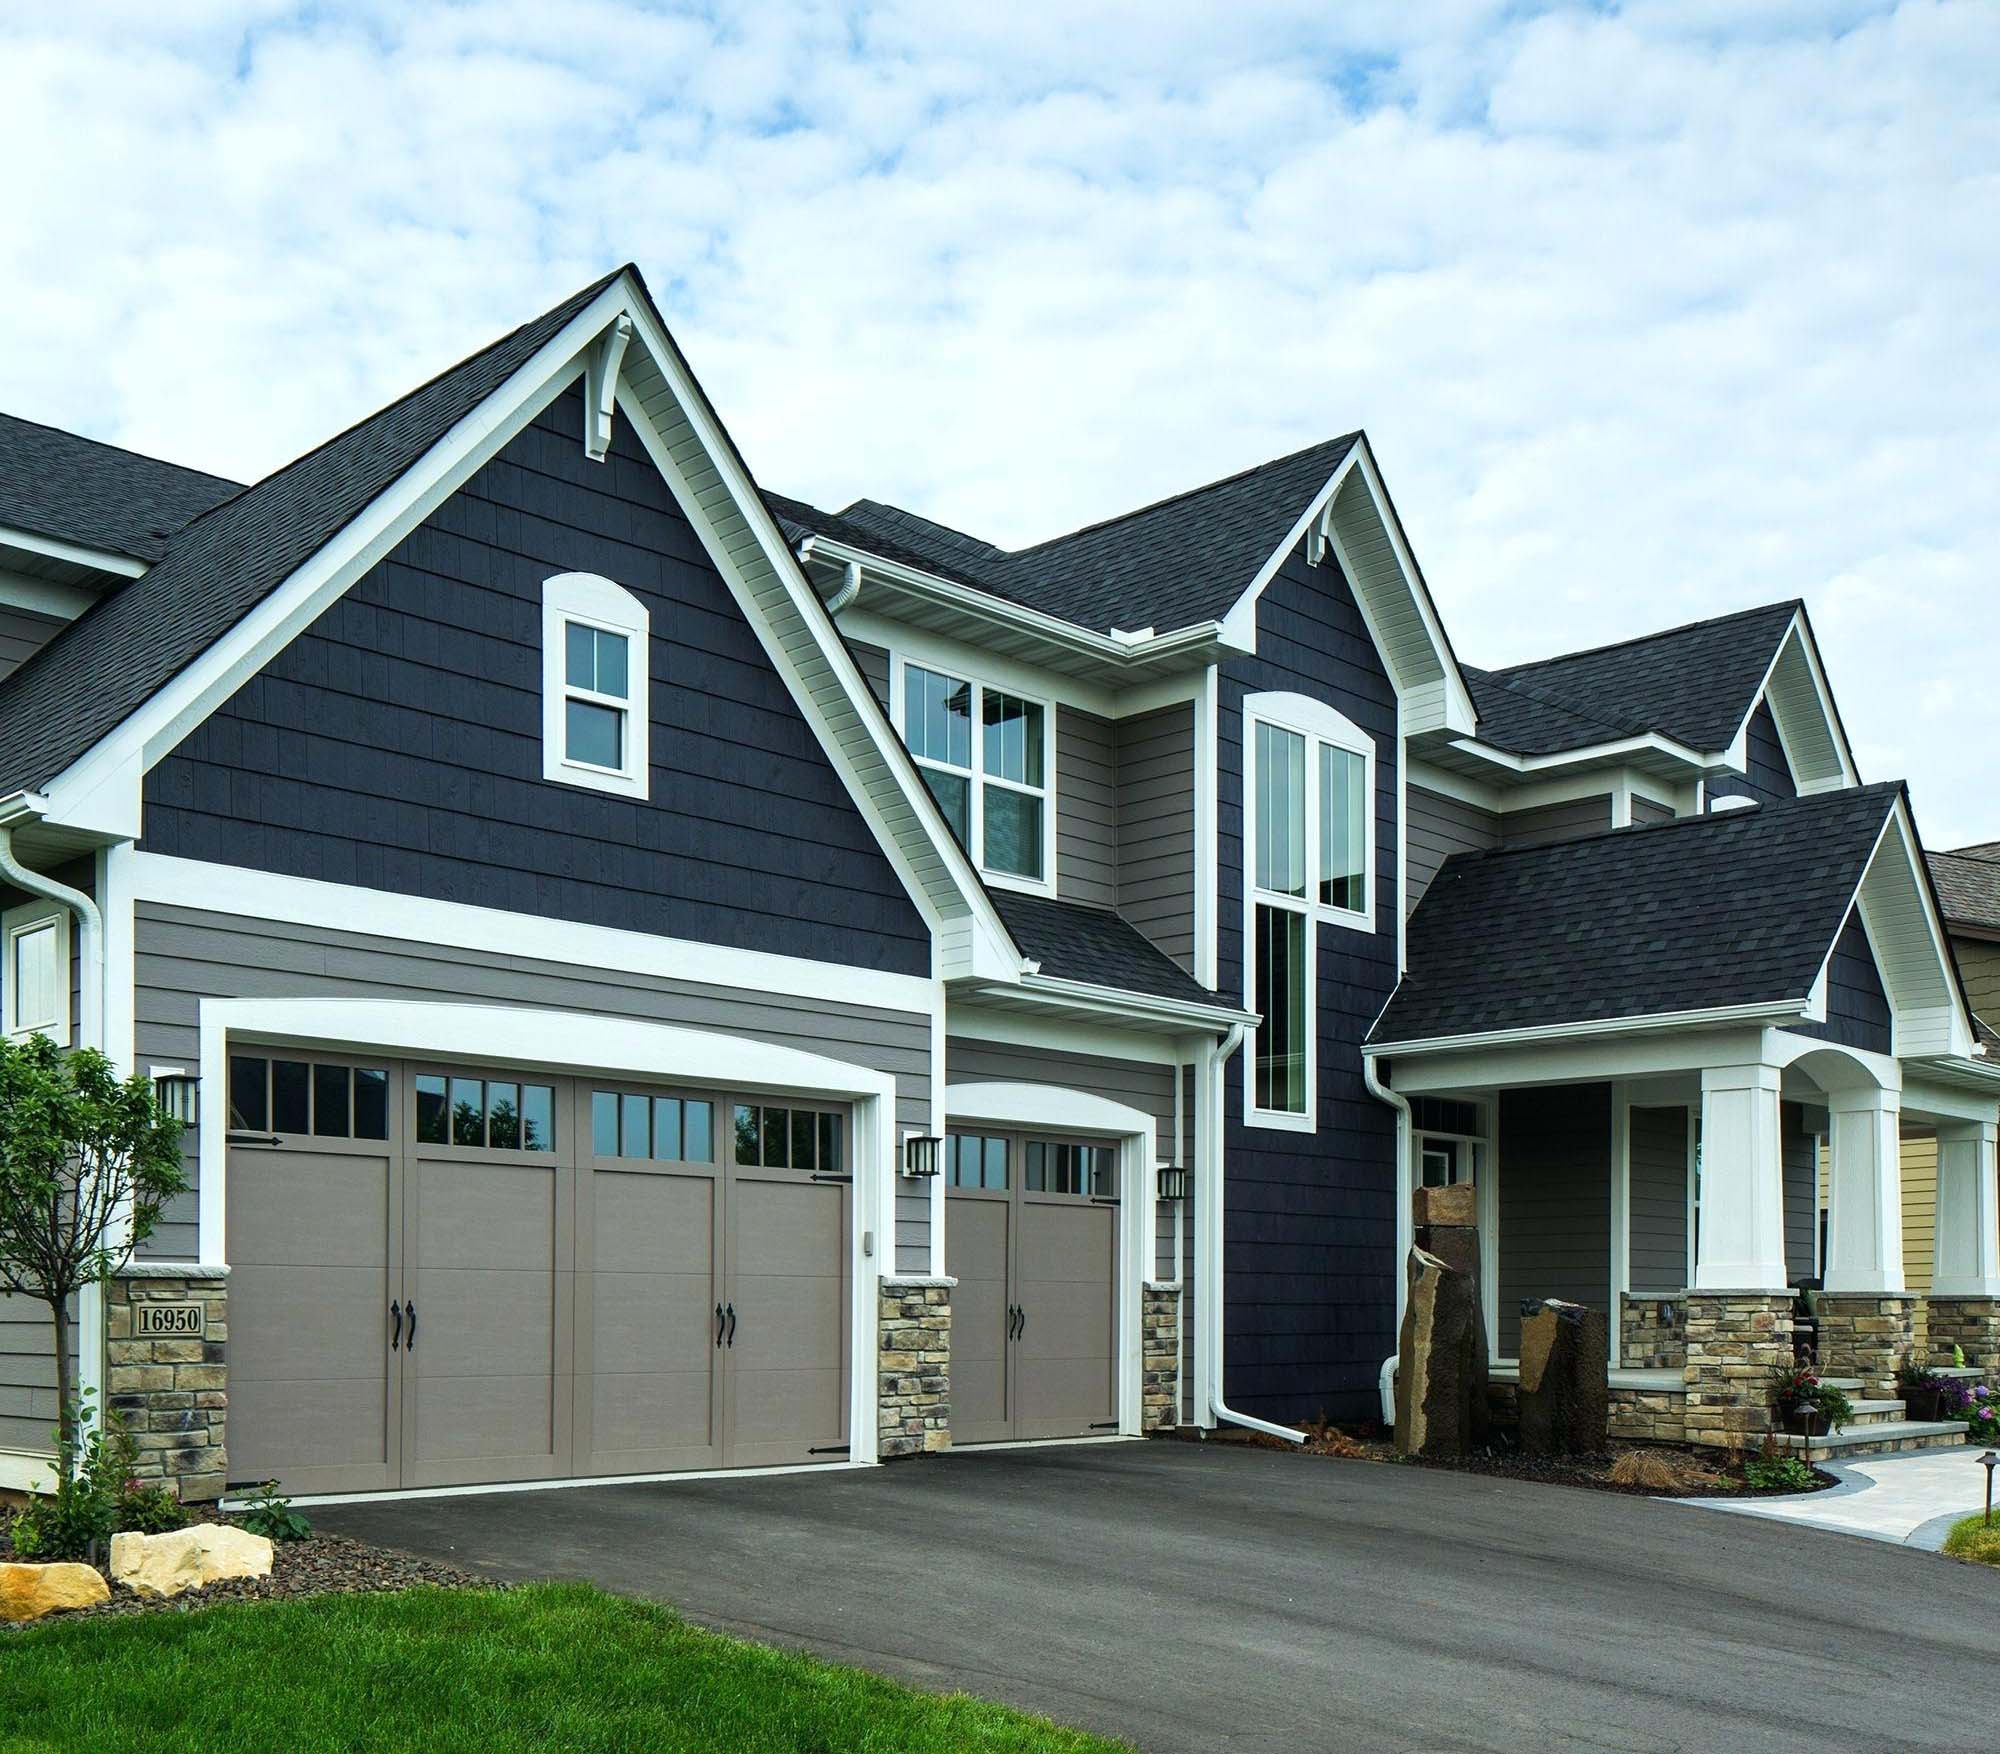 Two toned blueand gray siding color combination. Black roofing shingle. Taupe garage doors. Brown stone veneer. White trim and columns.